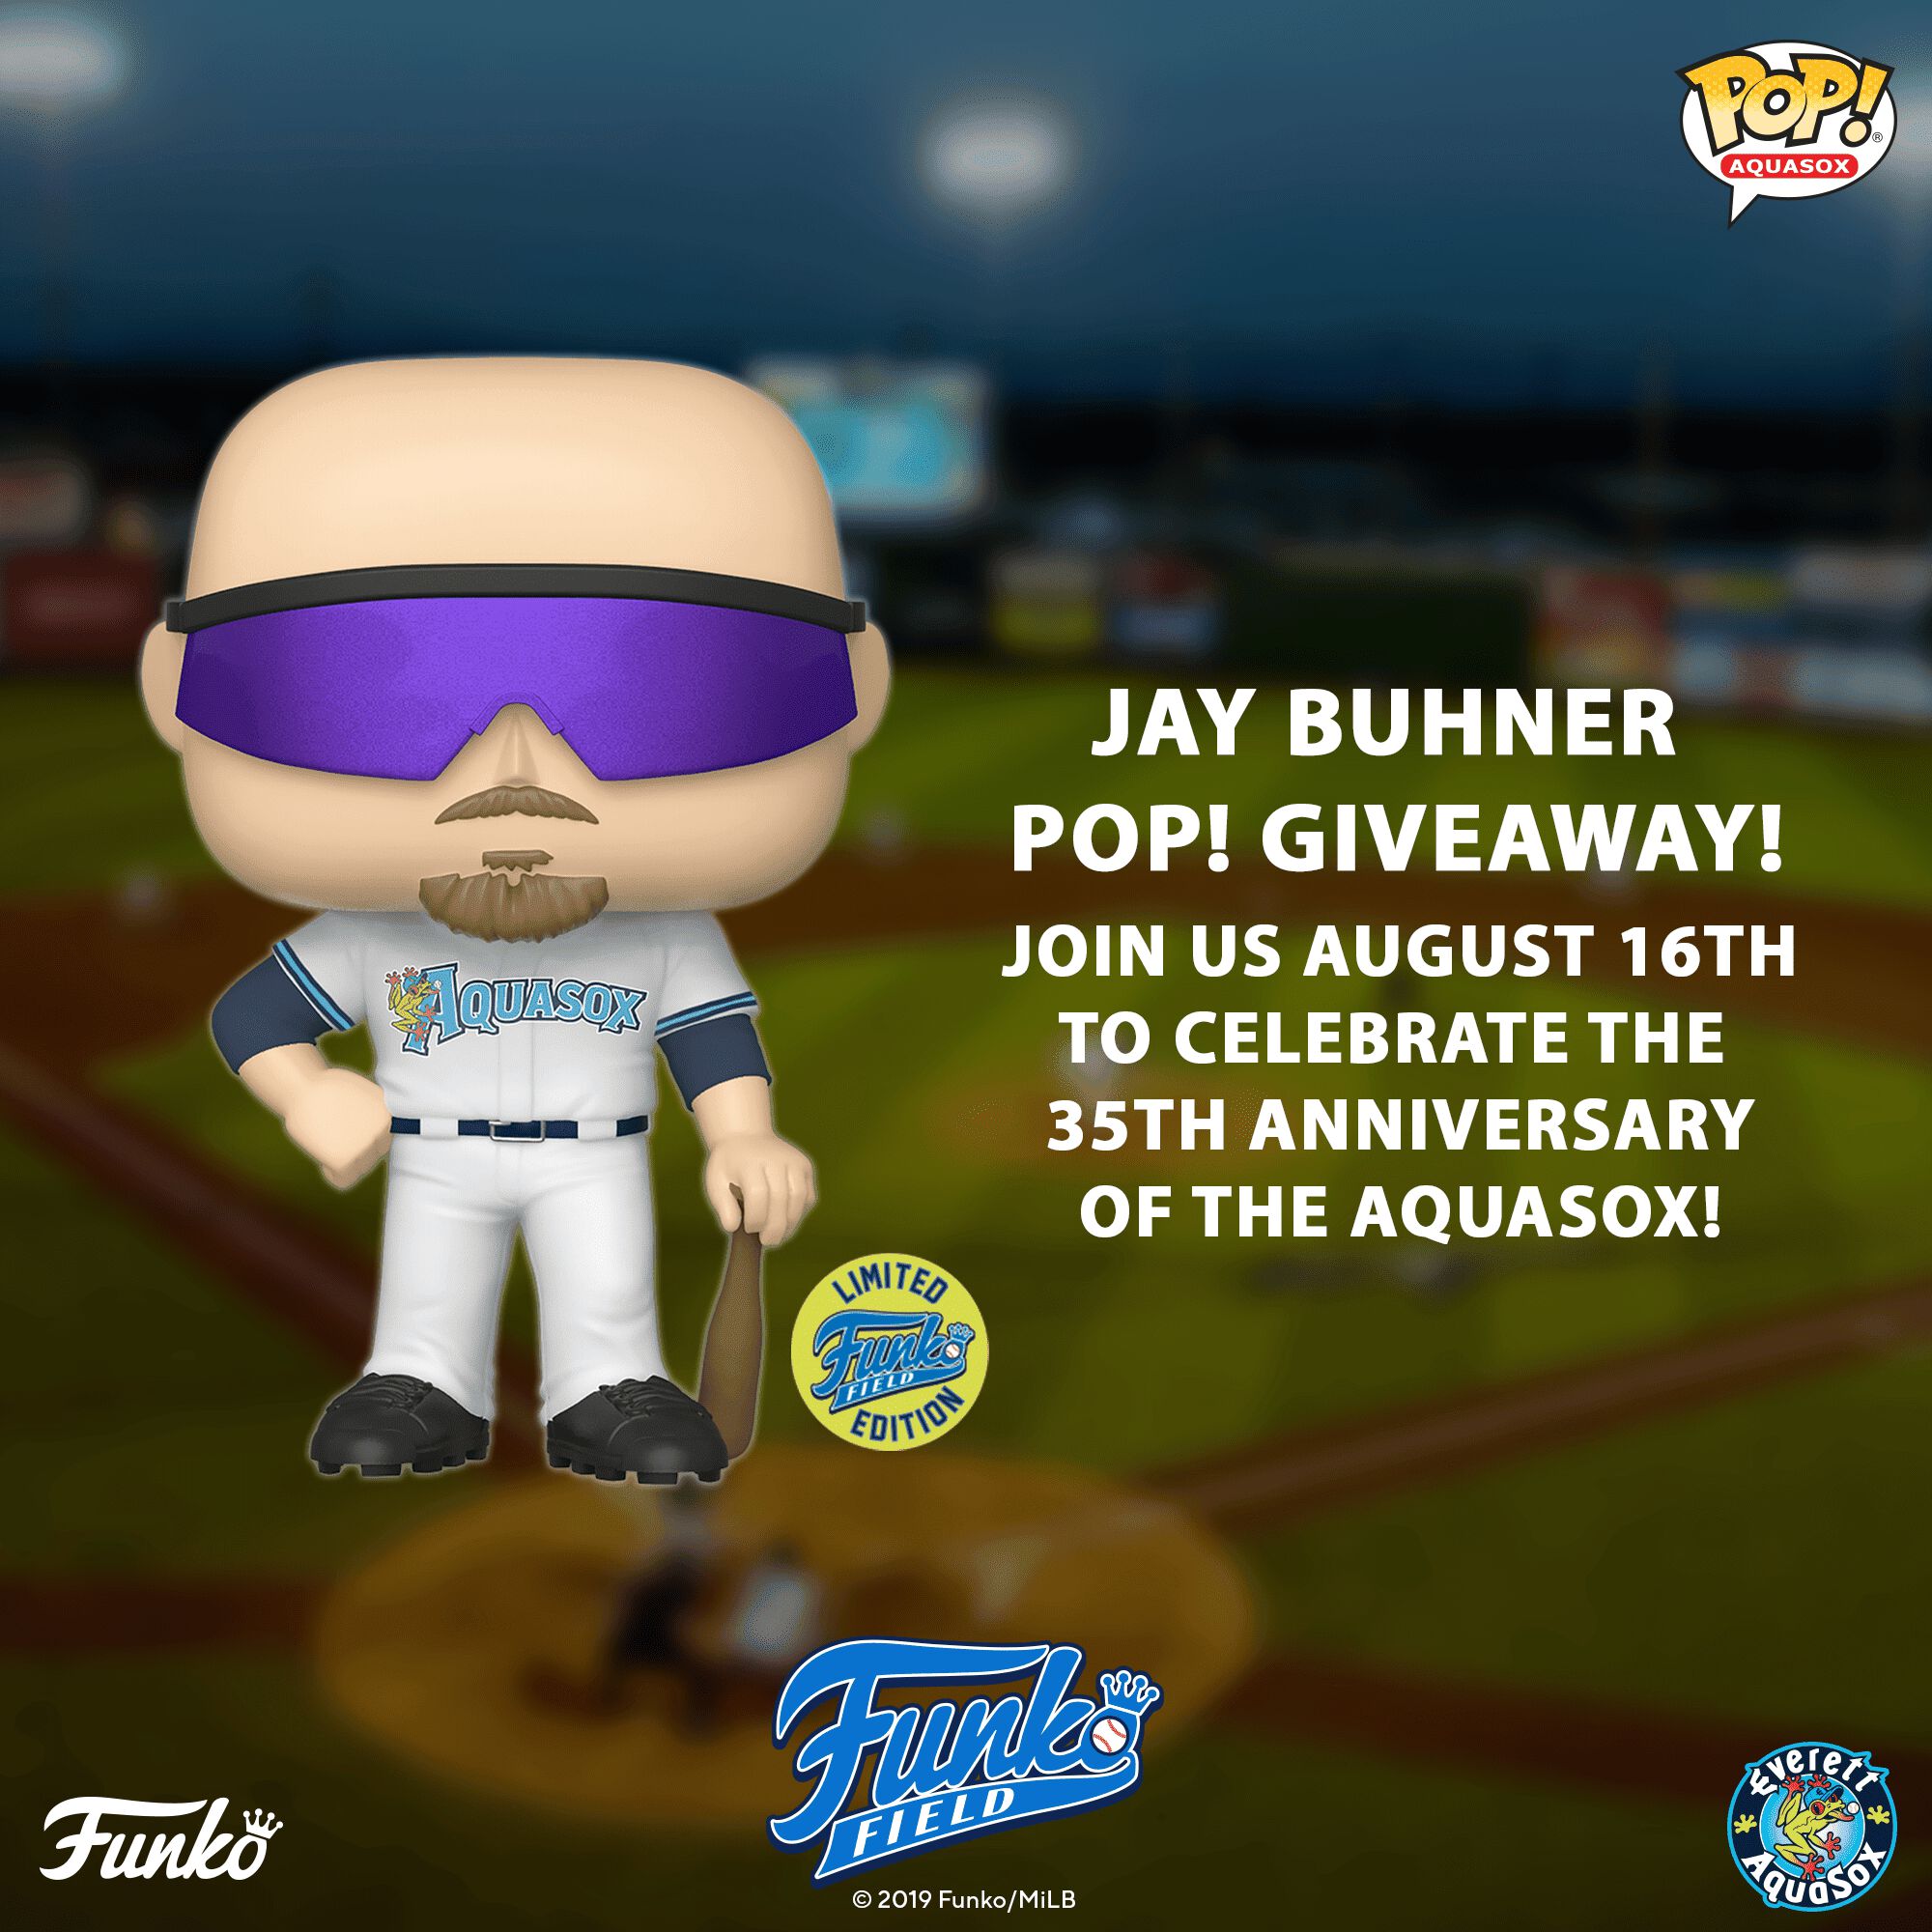 Jay Buhner Pop! Giveaway at Funko Field!